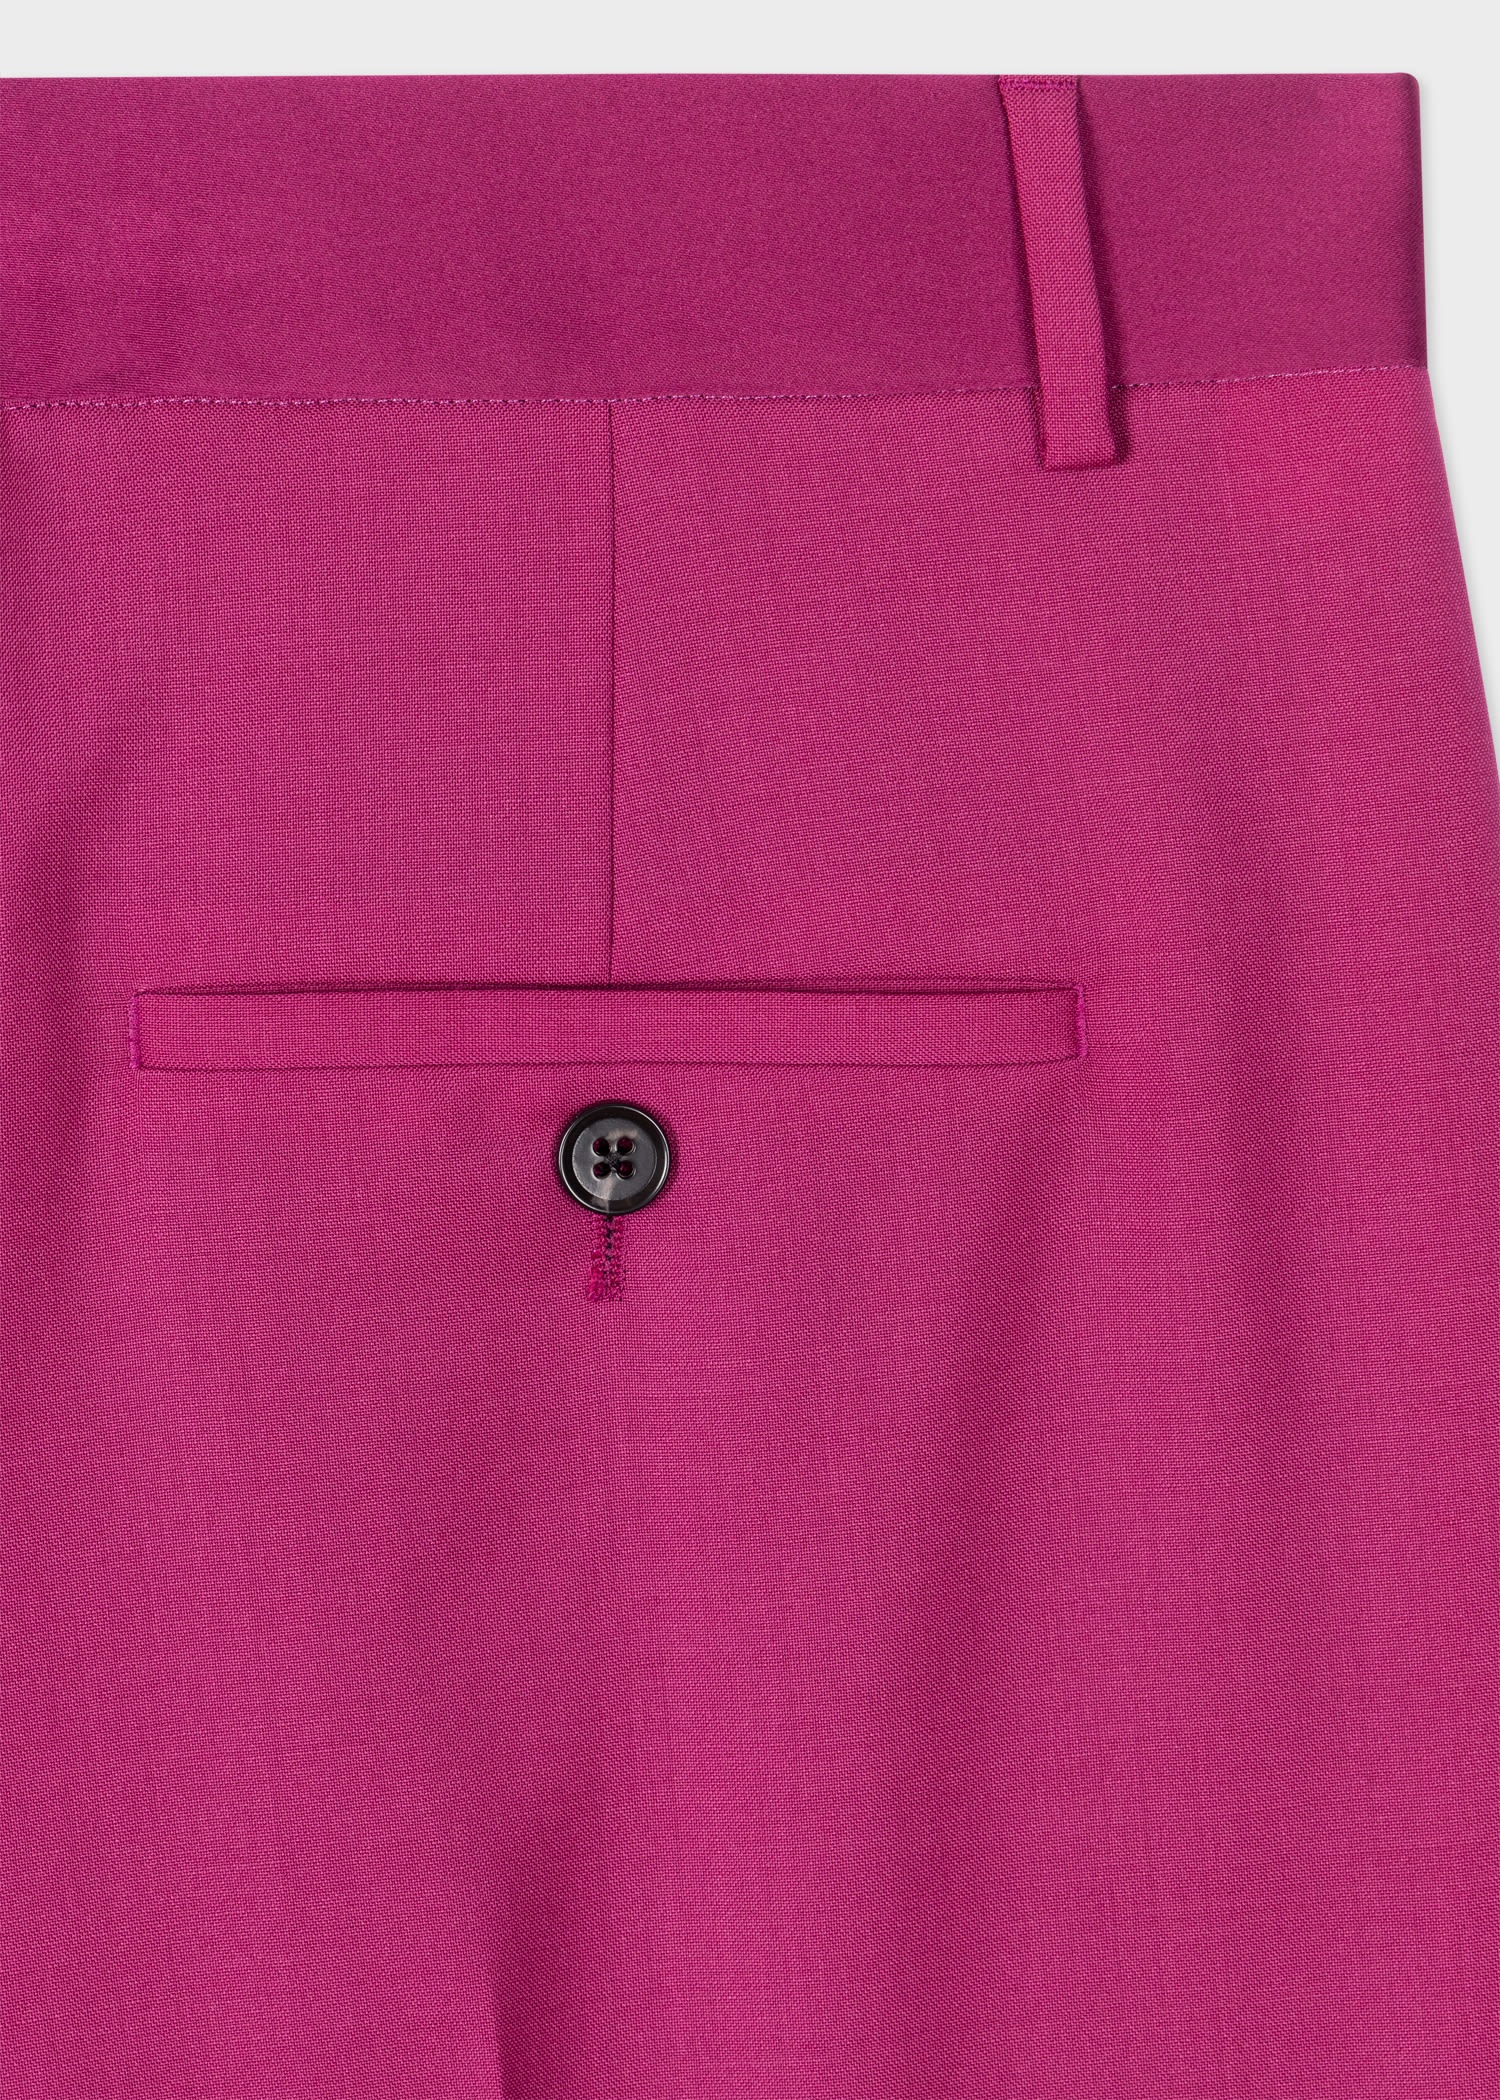 Magenta Wool-Mohair Double Breasted Suit - 6